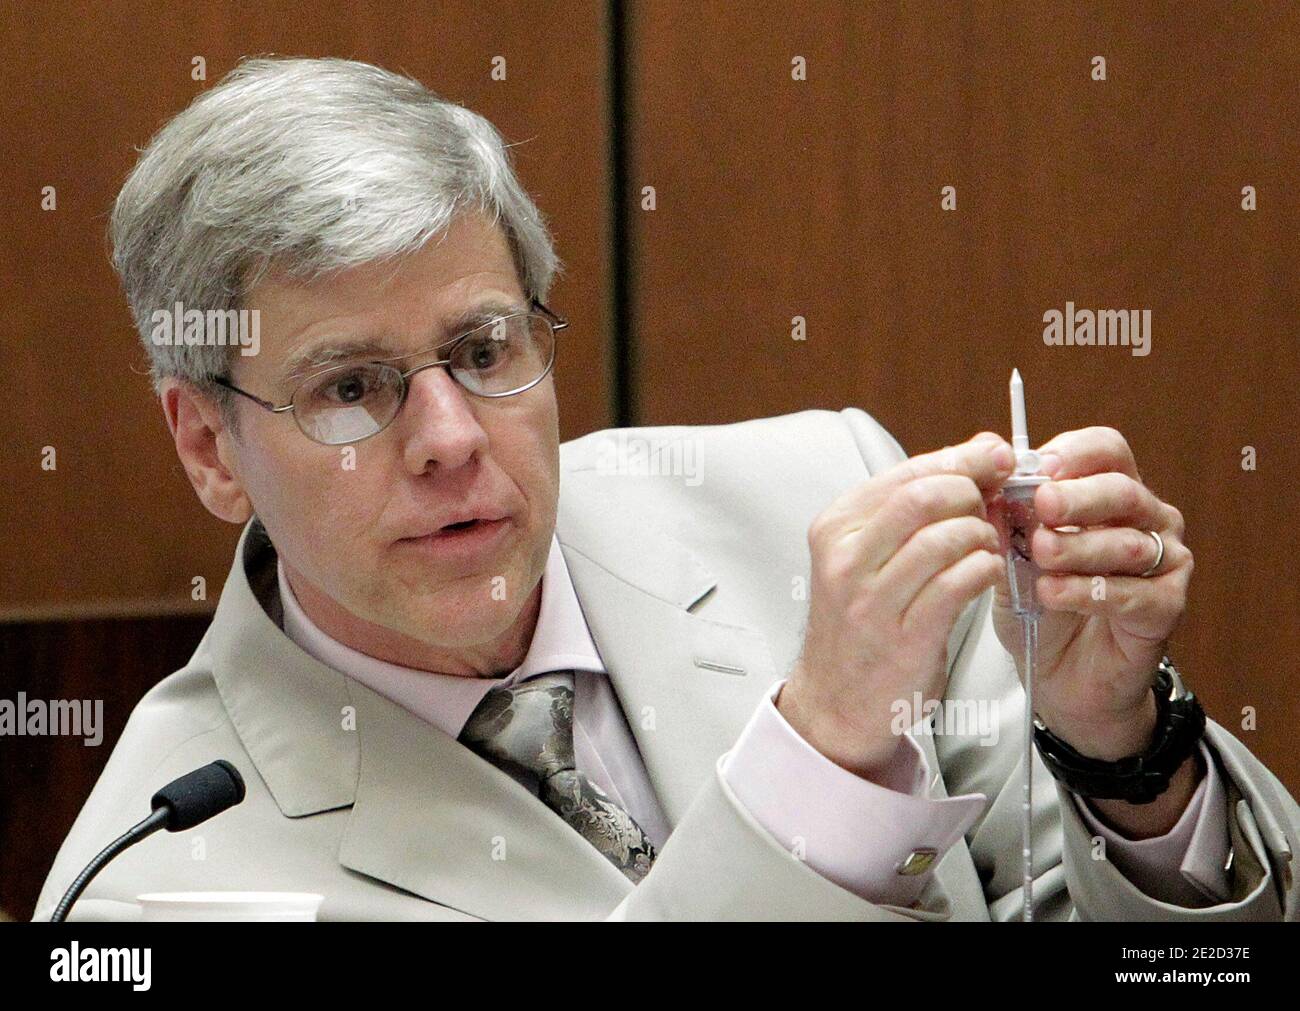 Anesthesiology expert Dr. Steven Shafer holds an intravenous line as he is cross examined by Ed Chernoff, a defense attorney for Dr. Conrad Murray, background right, during Murray's involuntary manslaughter trial in Los Angeles, CA, USA, on October 21, 2011. Murray has pleaded not guilty and faces four years in prison and the loss of his medical license if convicted of involuntary manslaughter in Michael Jackson's death. Photo by Reed Saxon/Pool/ABACAPRESS.COM Stock Photo